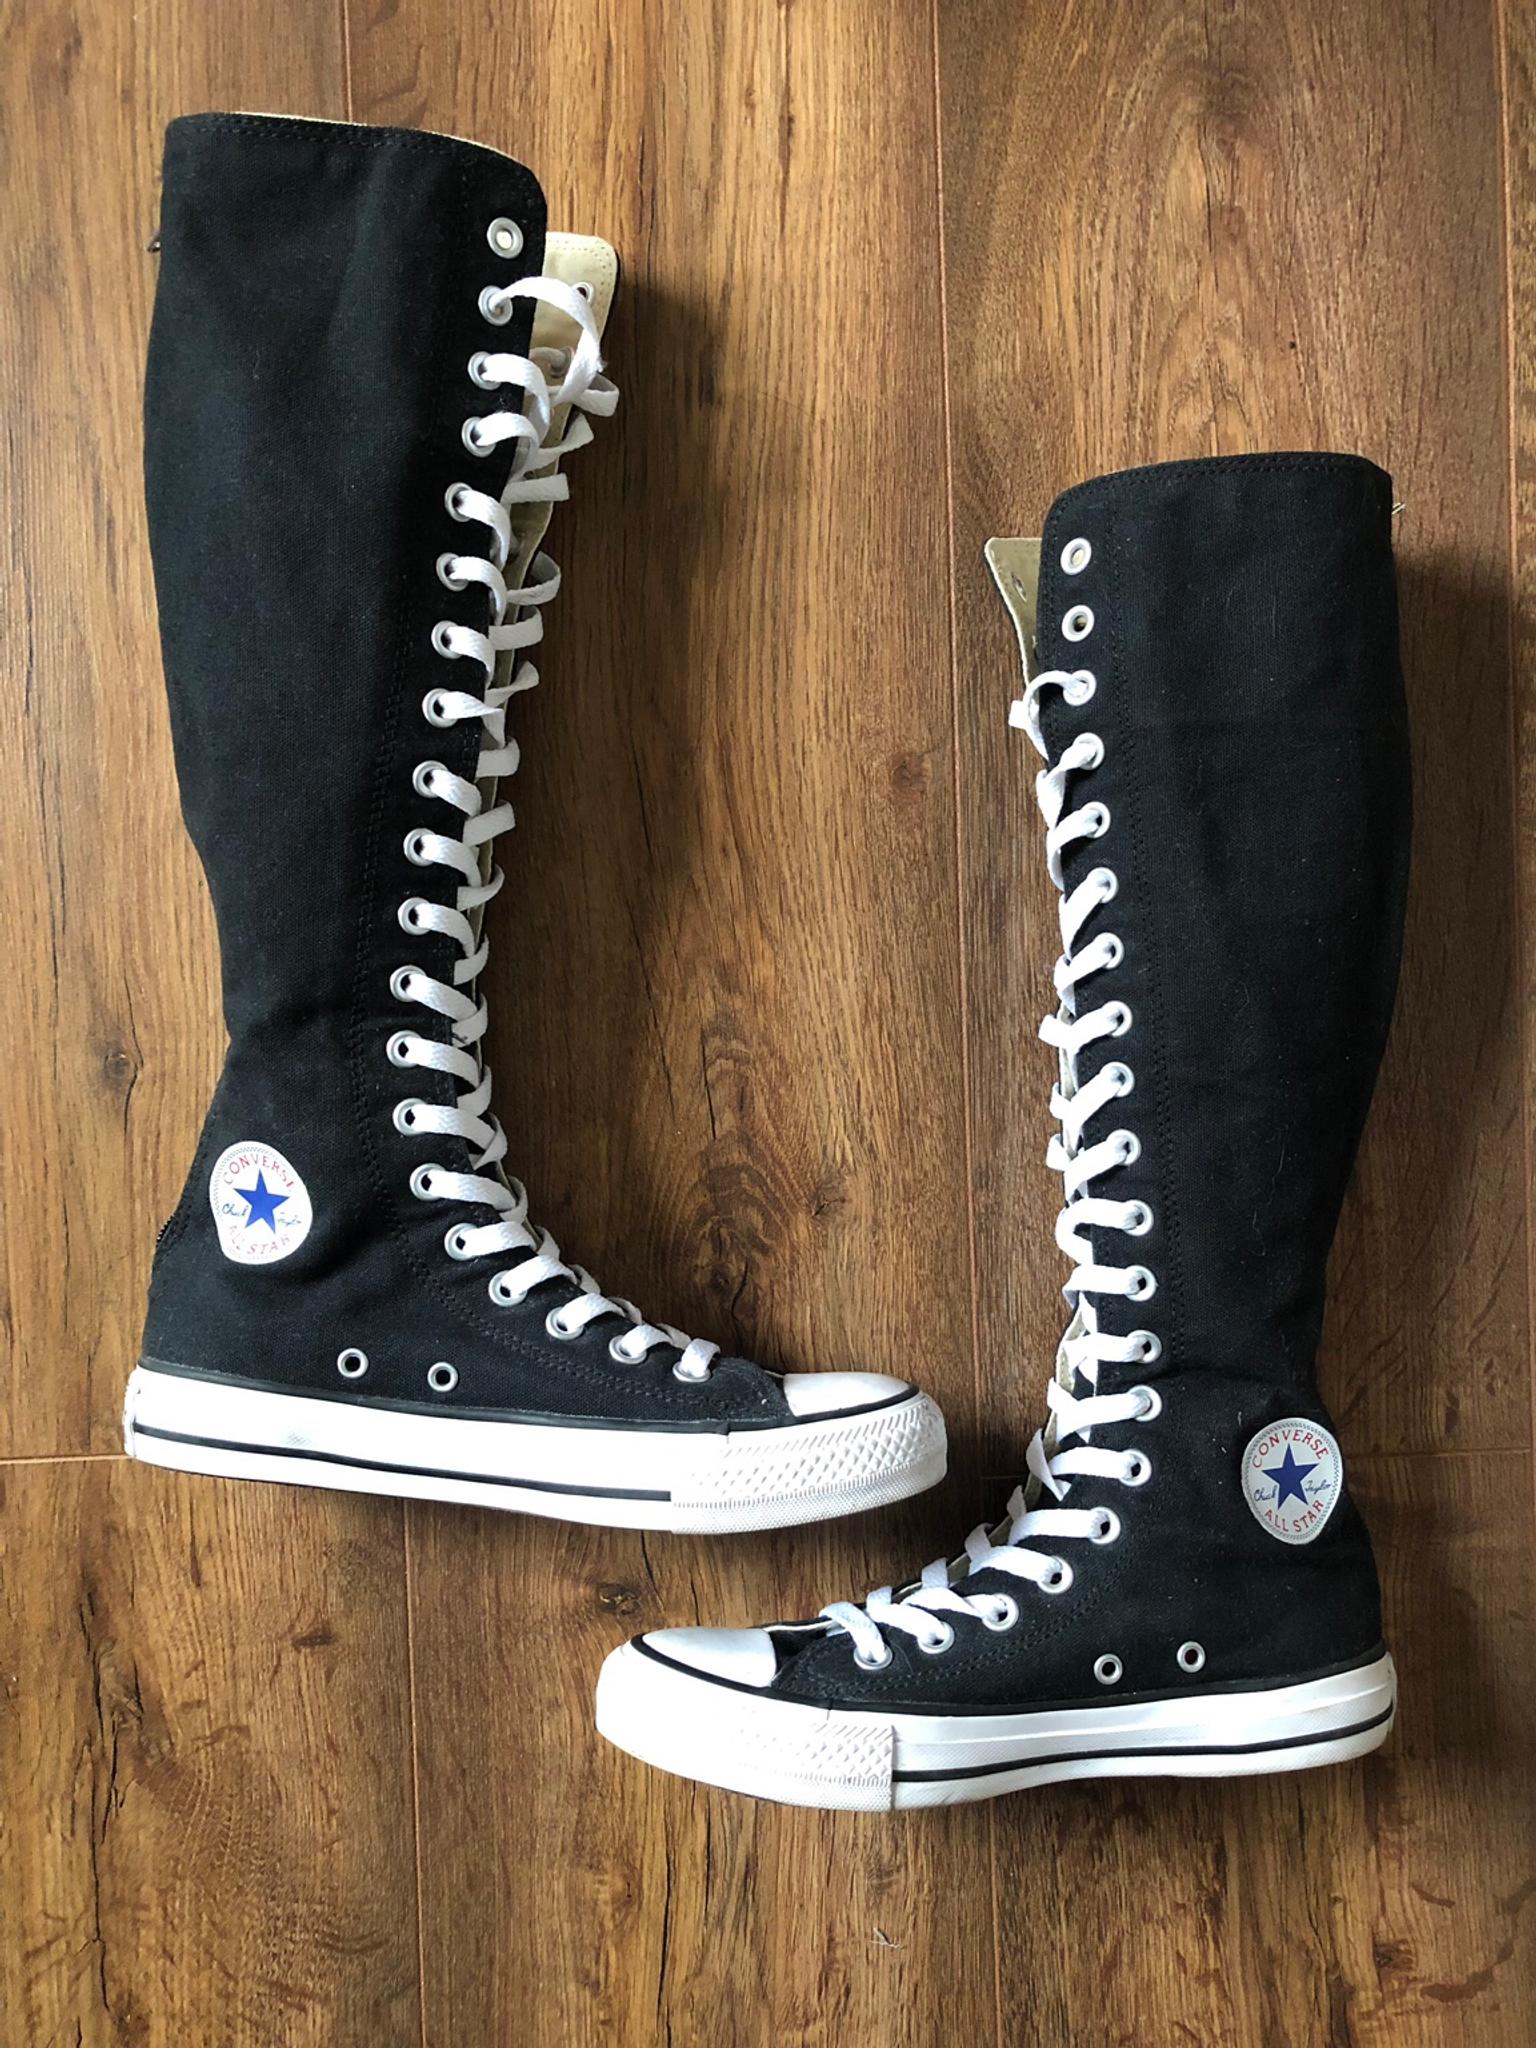 converse boots size 4